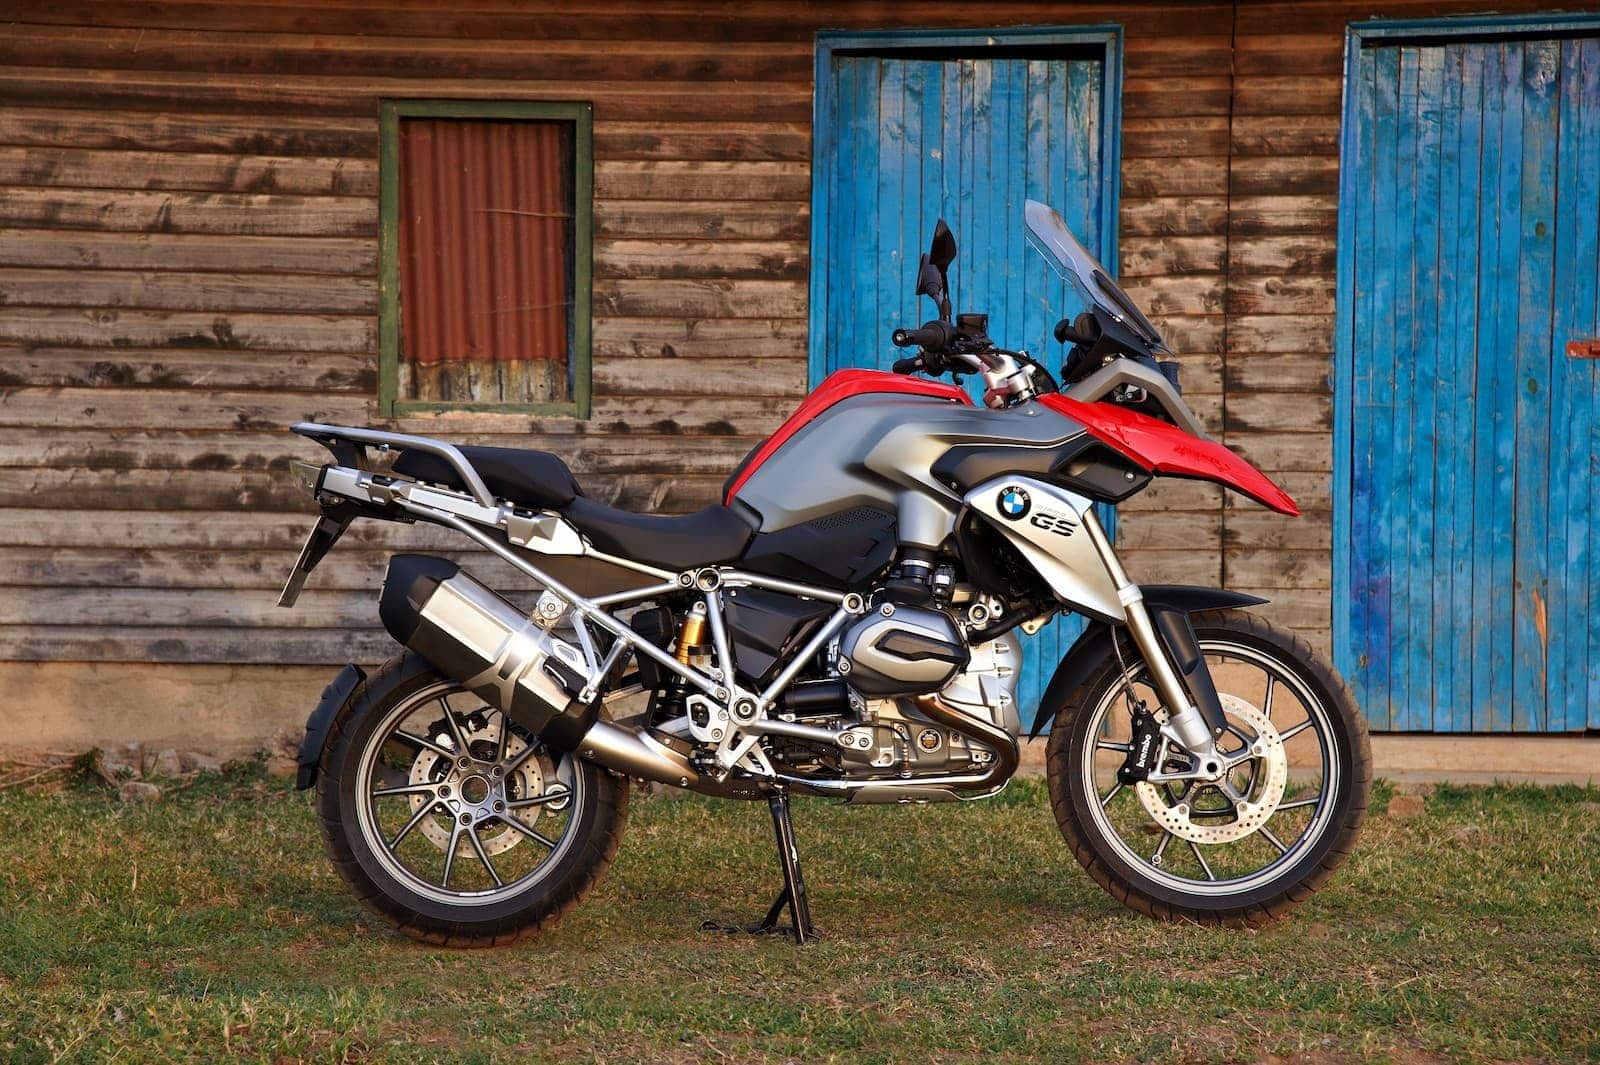 BMW R 1200 GS wethead 2013-2018 parked in front of barn